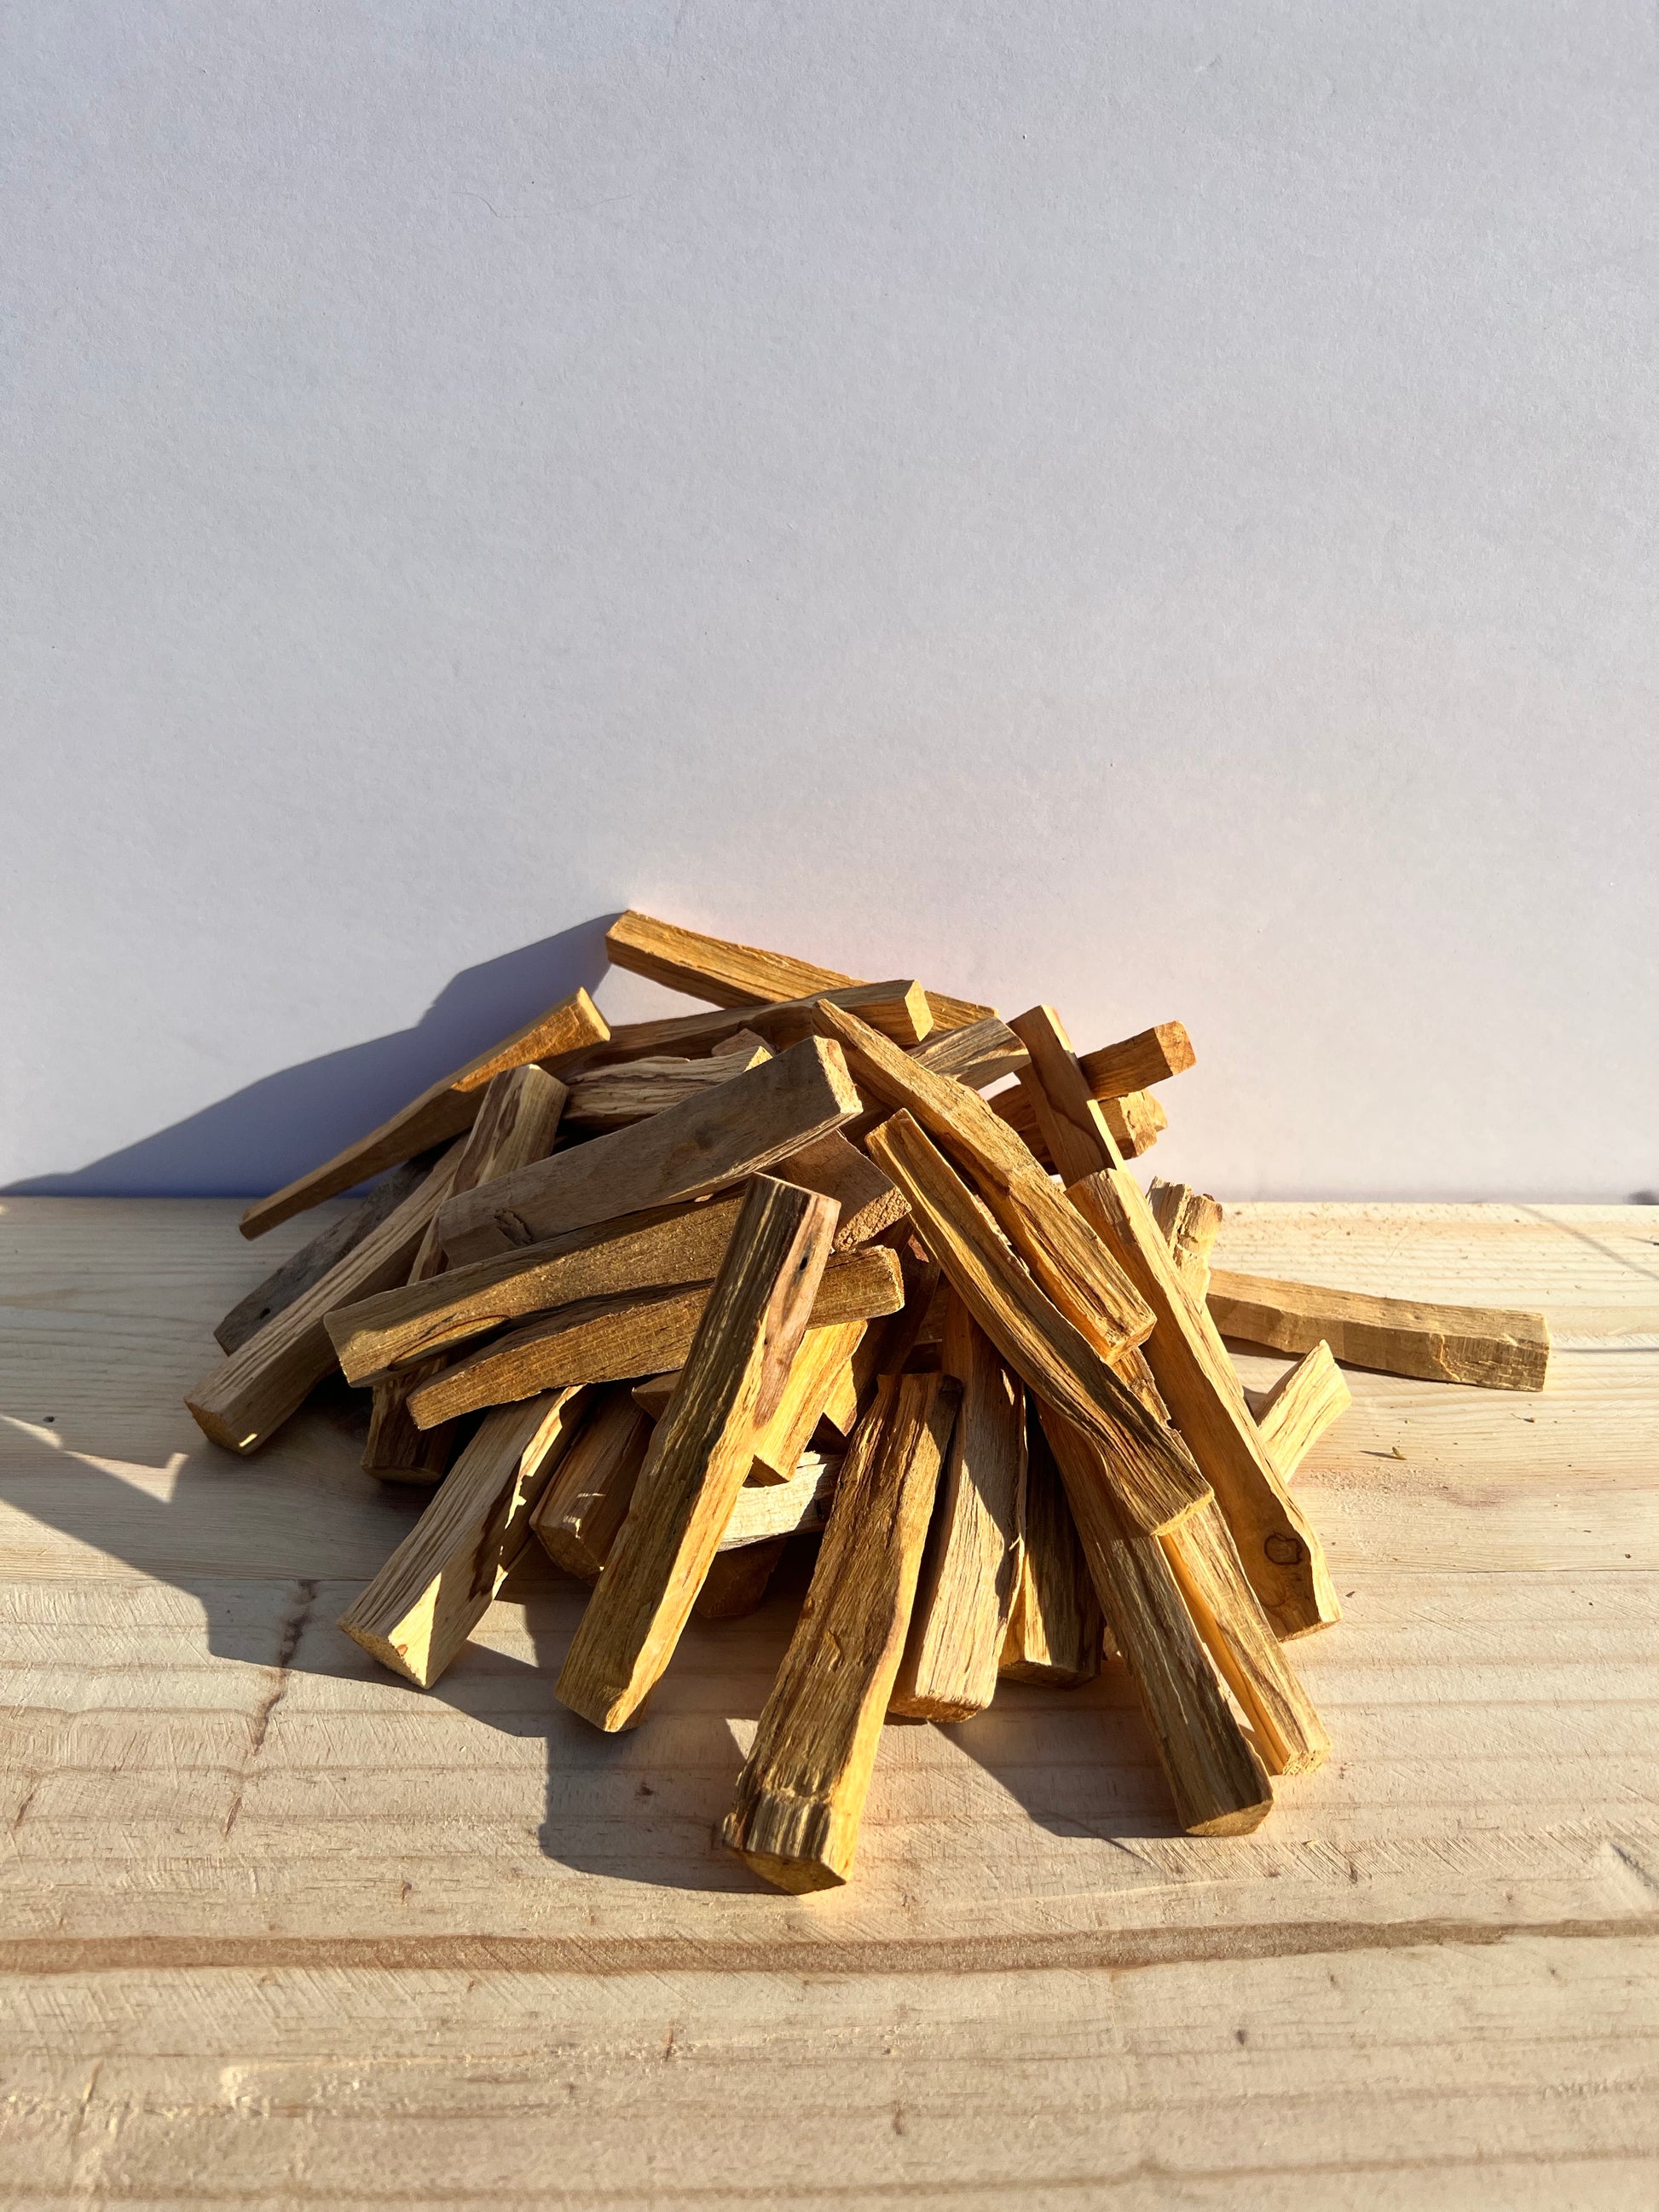 Another view of a pile of palo santo sticks.